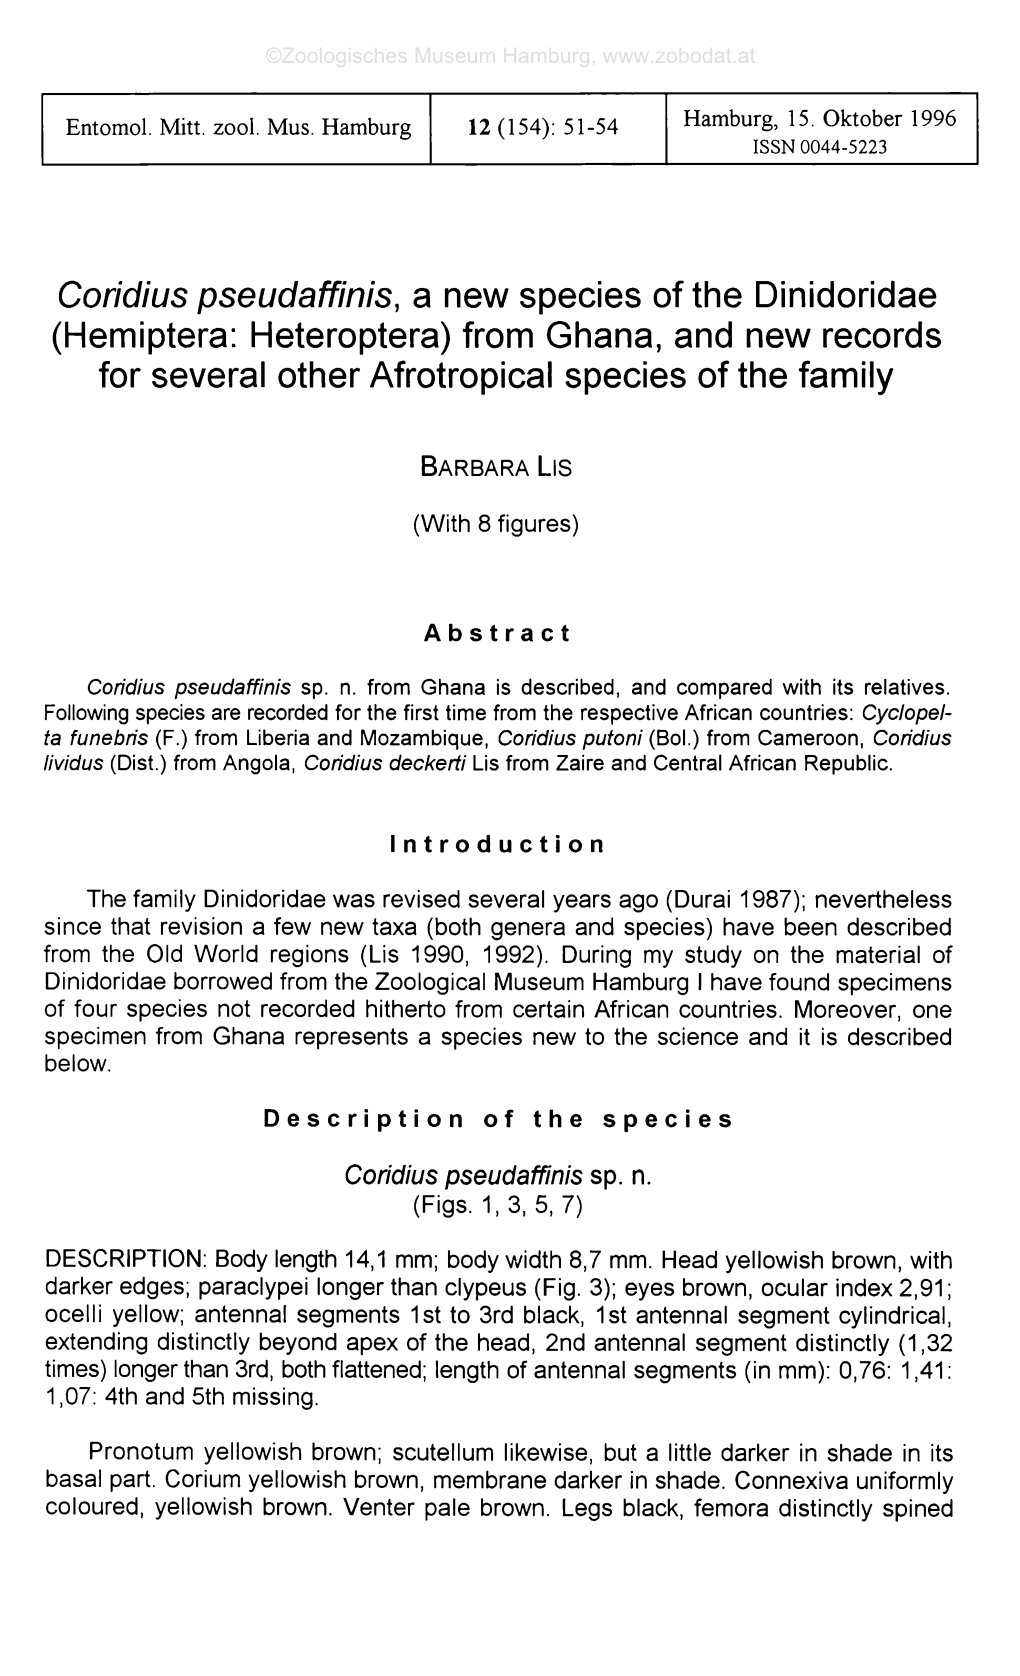 Coridius Pseudaffinis, a New Species of the Dinidoridae (Hemiptera: Heteroptera) from Ghana, and New Records for Several Other Afrotropical Species of the Family